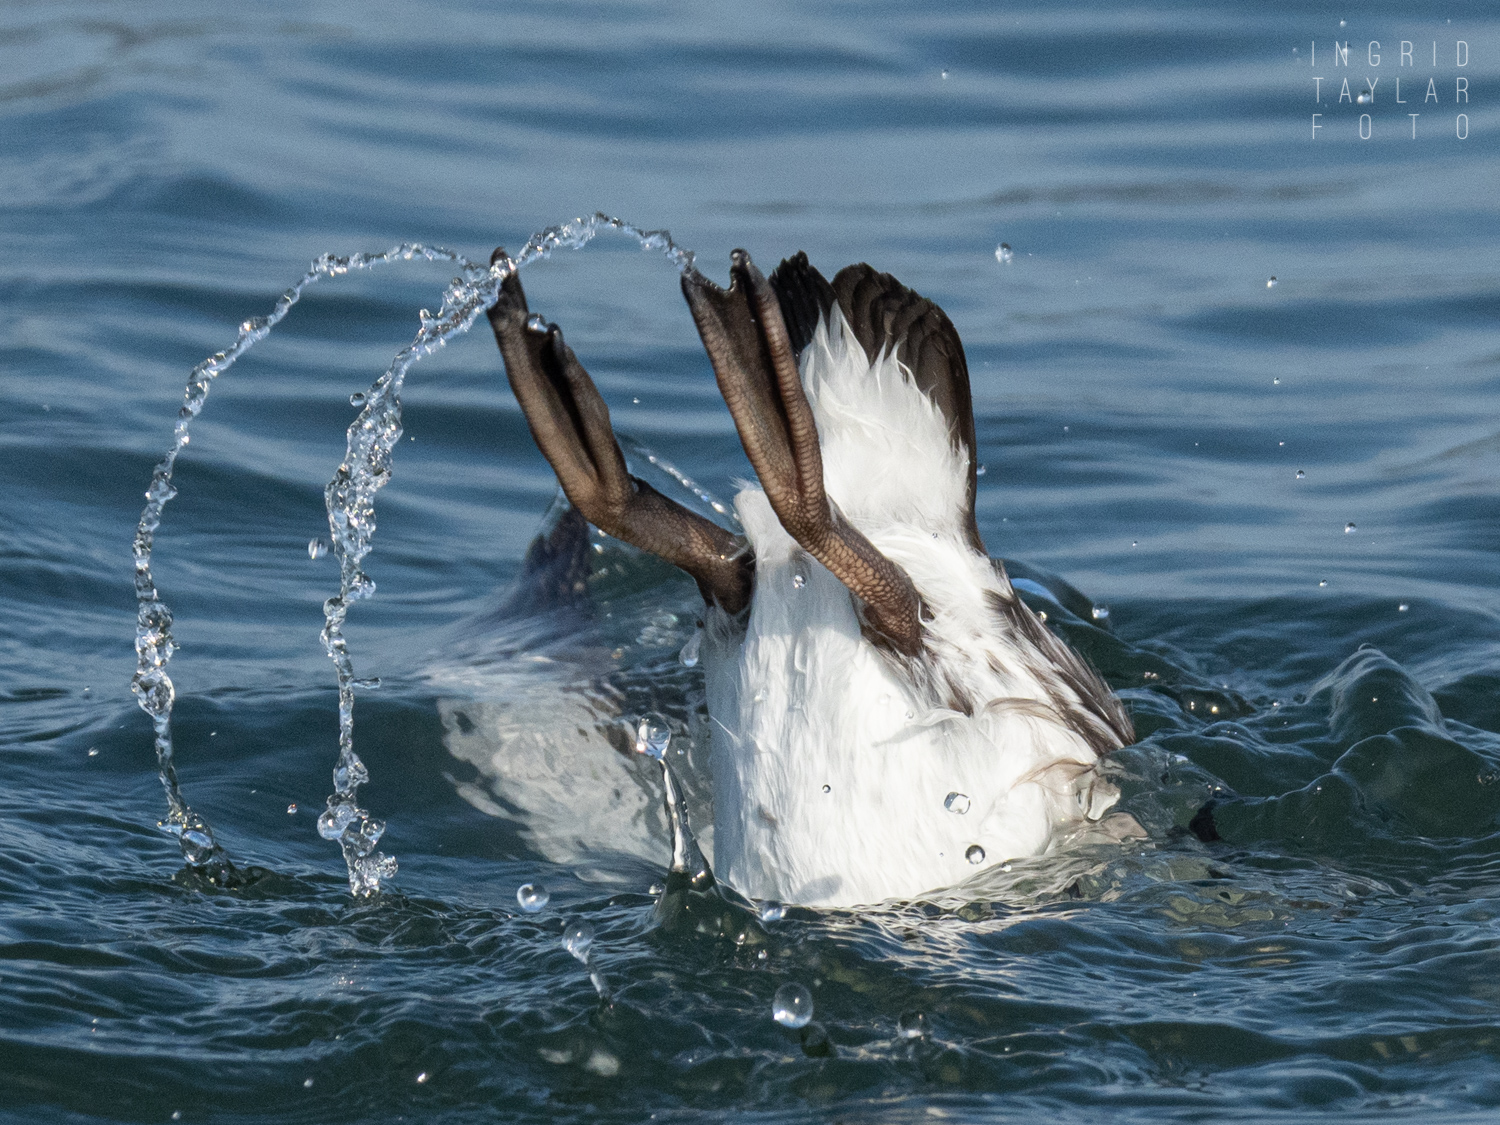 Common Murre Diving 3